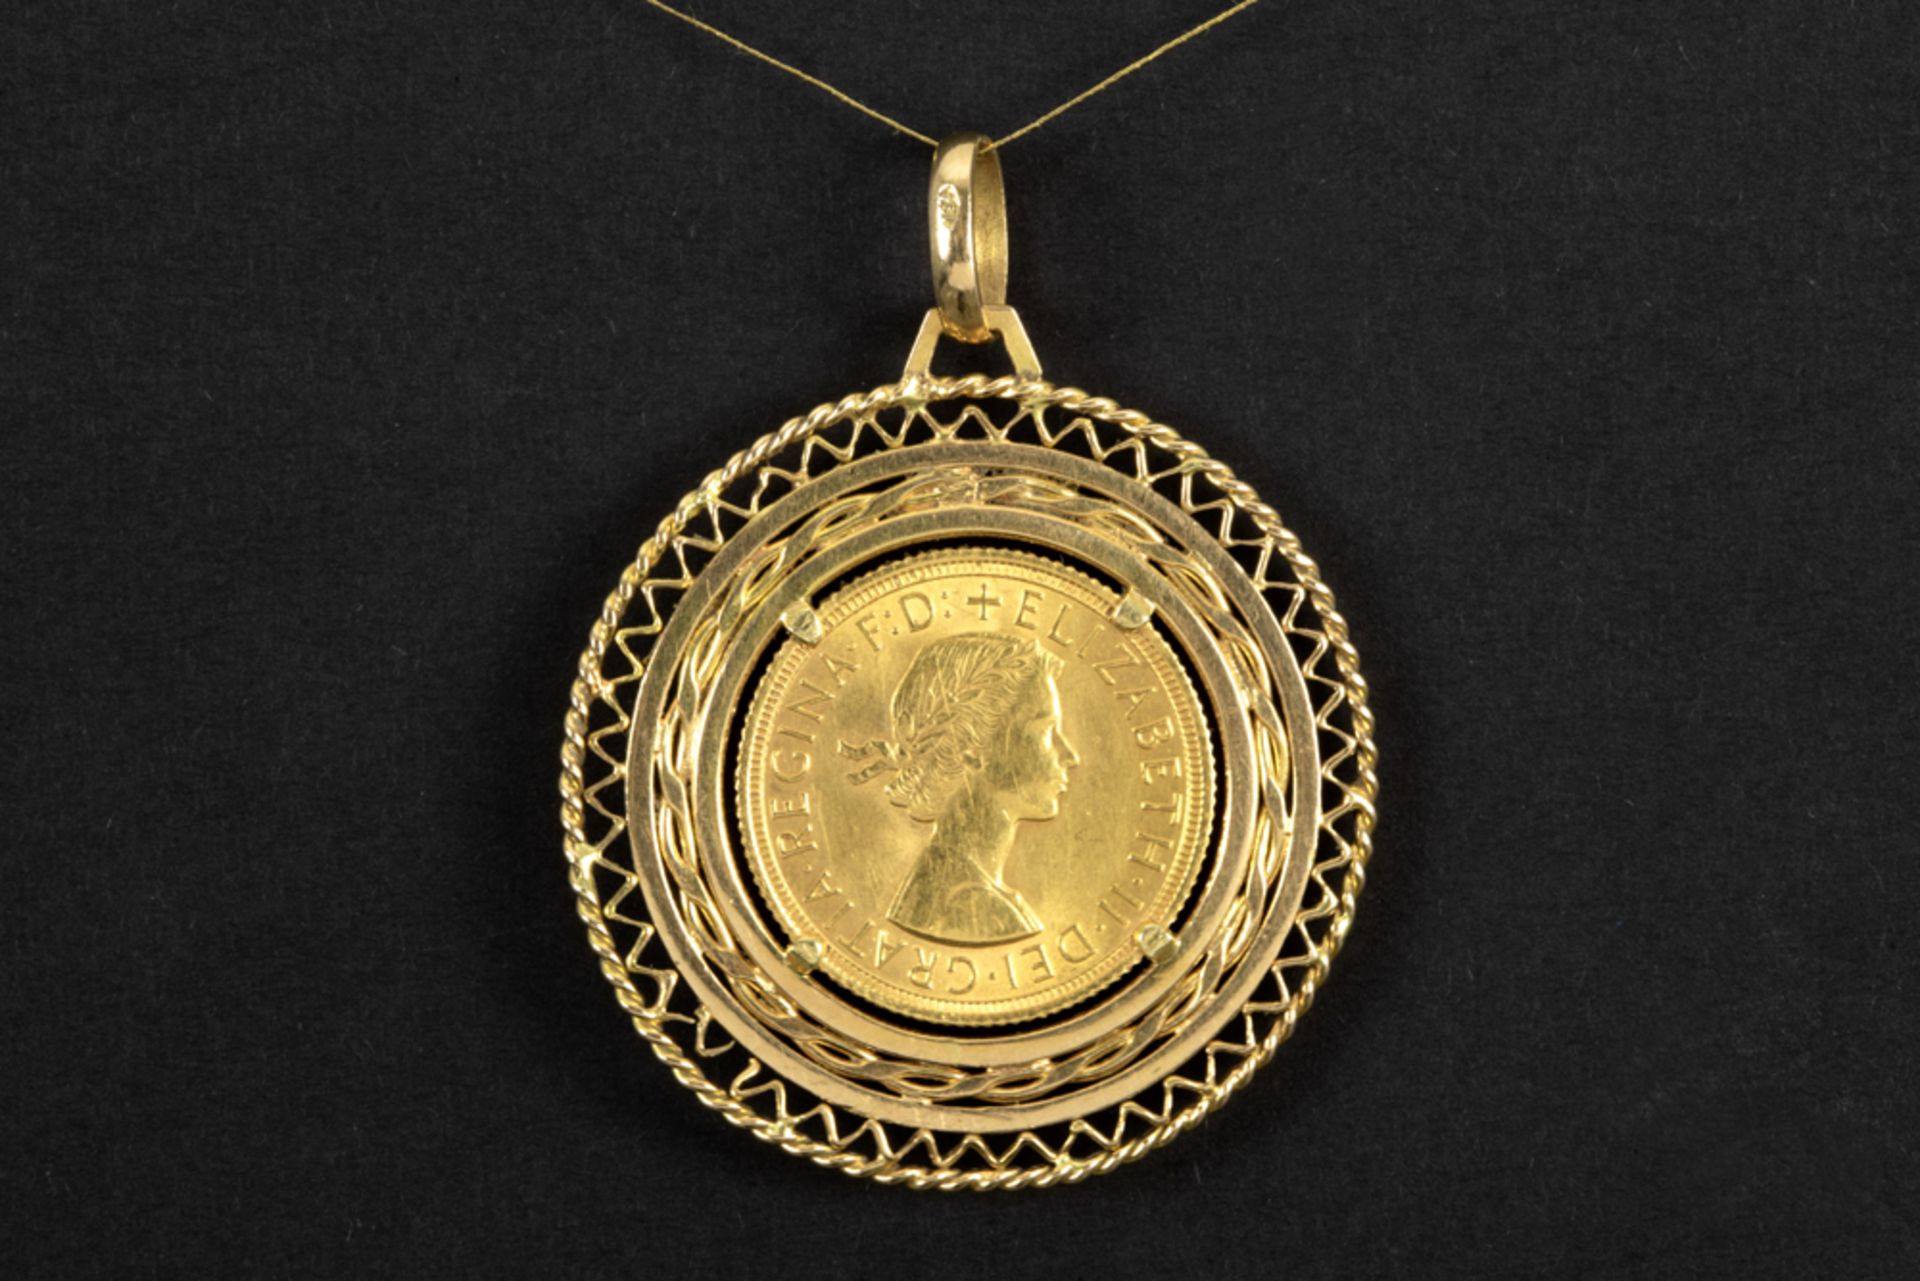 golden "Elisabeth II" coin dd 1958 set in a pendant in yellow gold (18 carat)